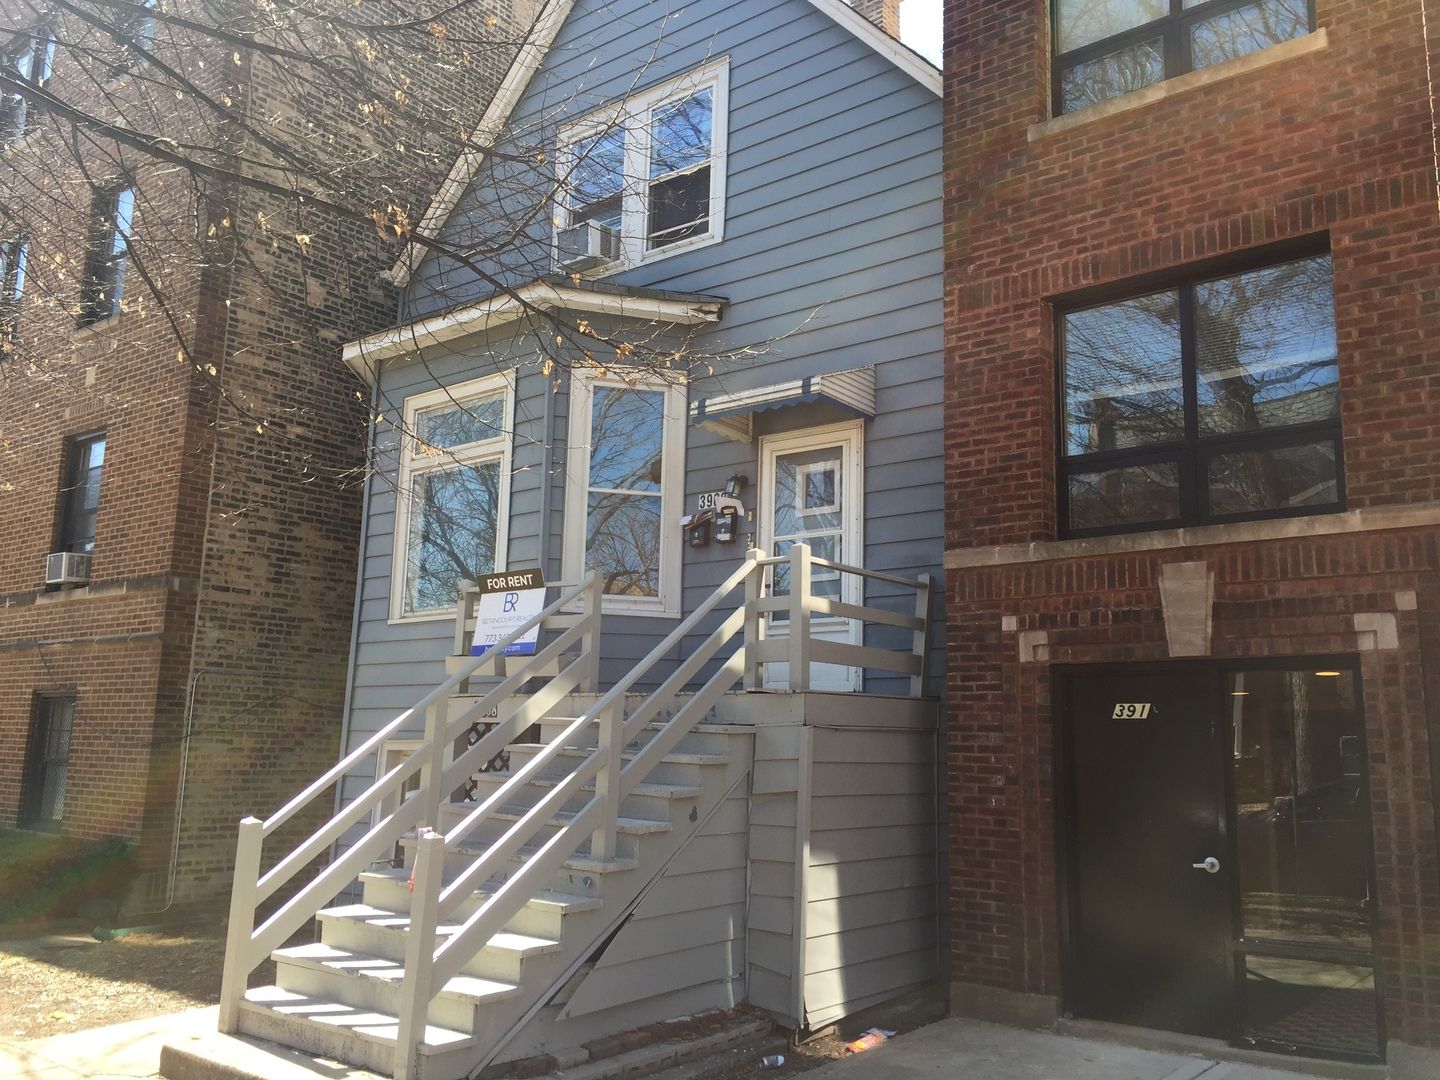 Main Photo: 3908 N Janssen Avenue Unit 1 in CHICAGO: CHI - Lake View Residential Lease for lease ()  : MLS®# 09900211